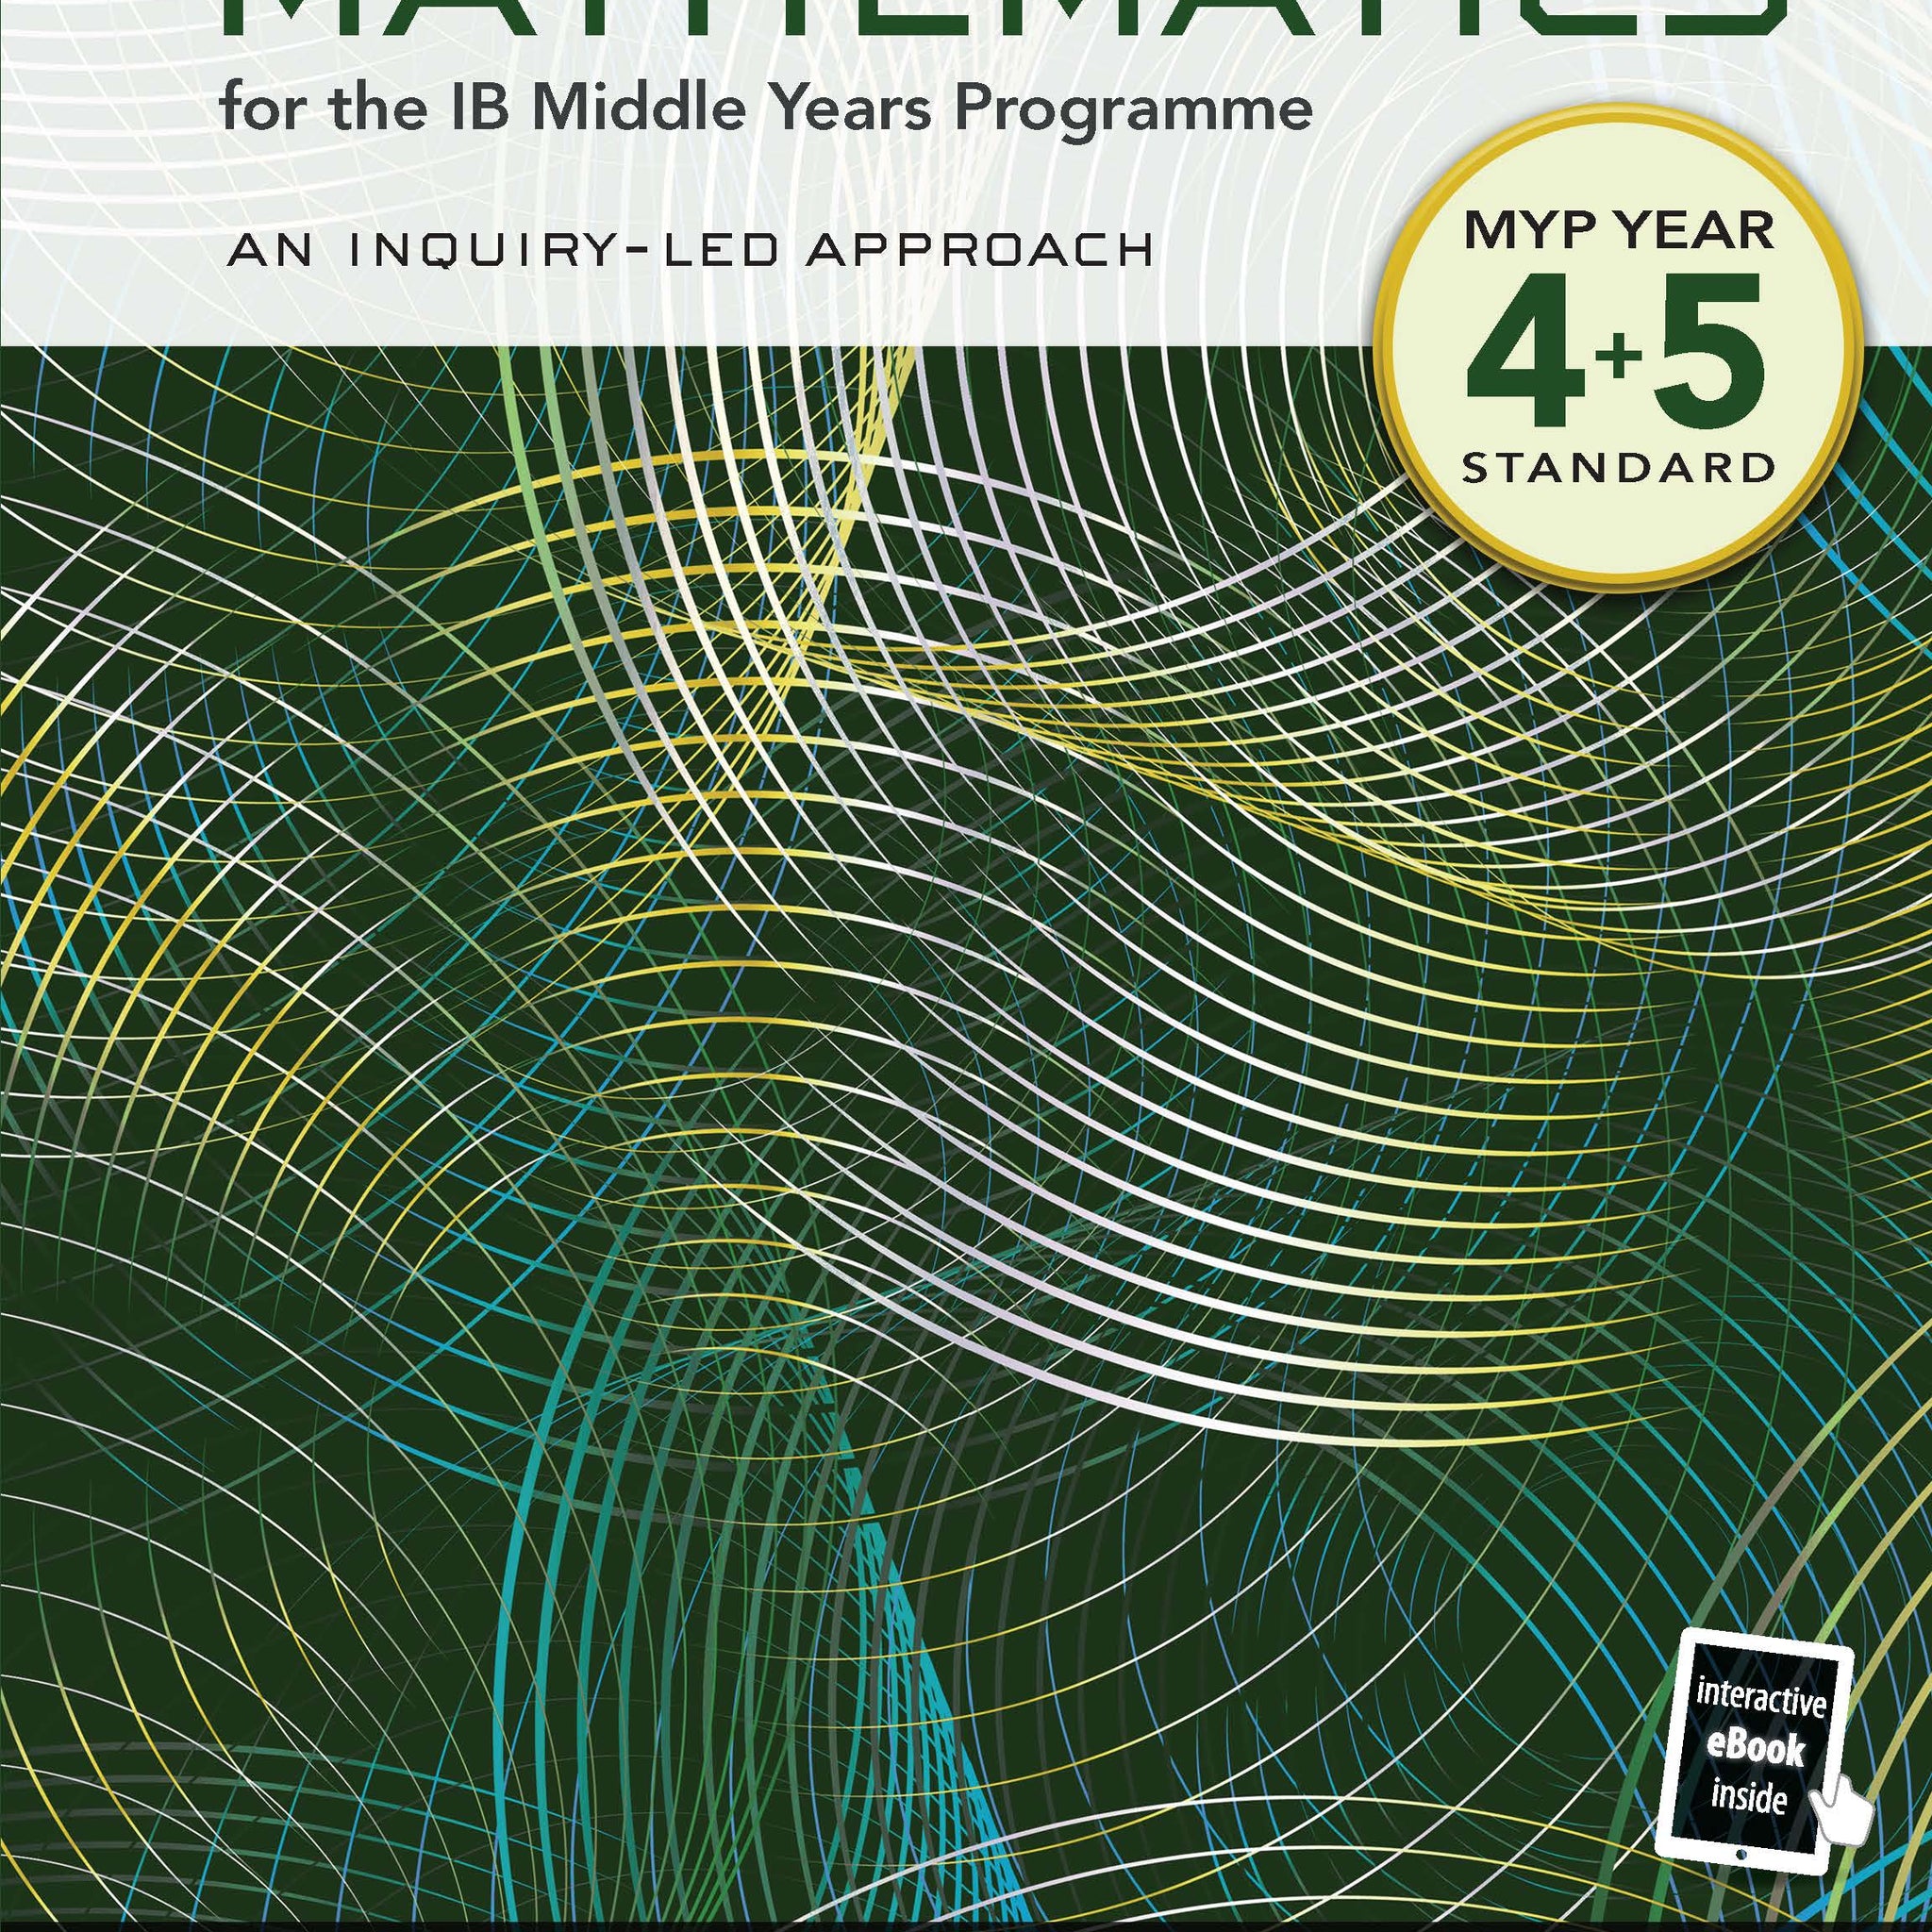 Pearson Mathematics for the IB Middle Years Programme Year 4+5 Standard (Out of Stock until November 15)